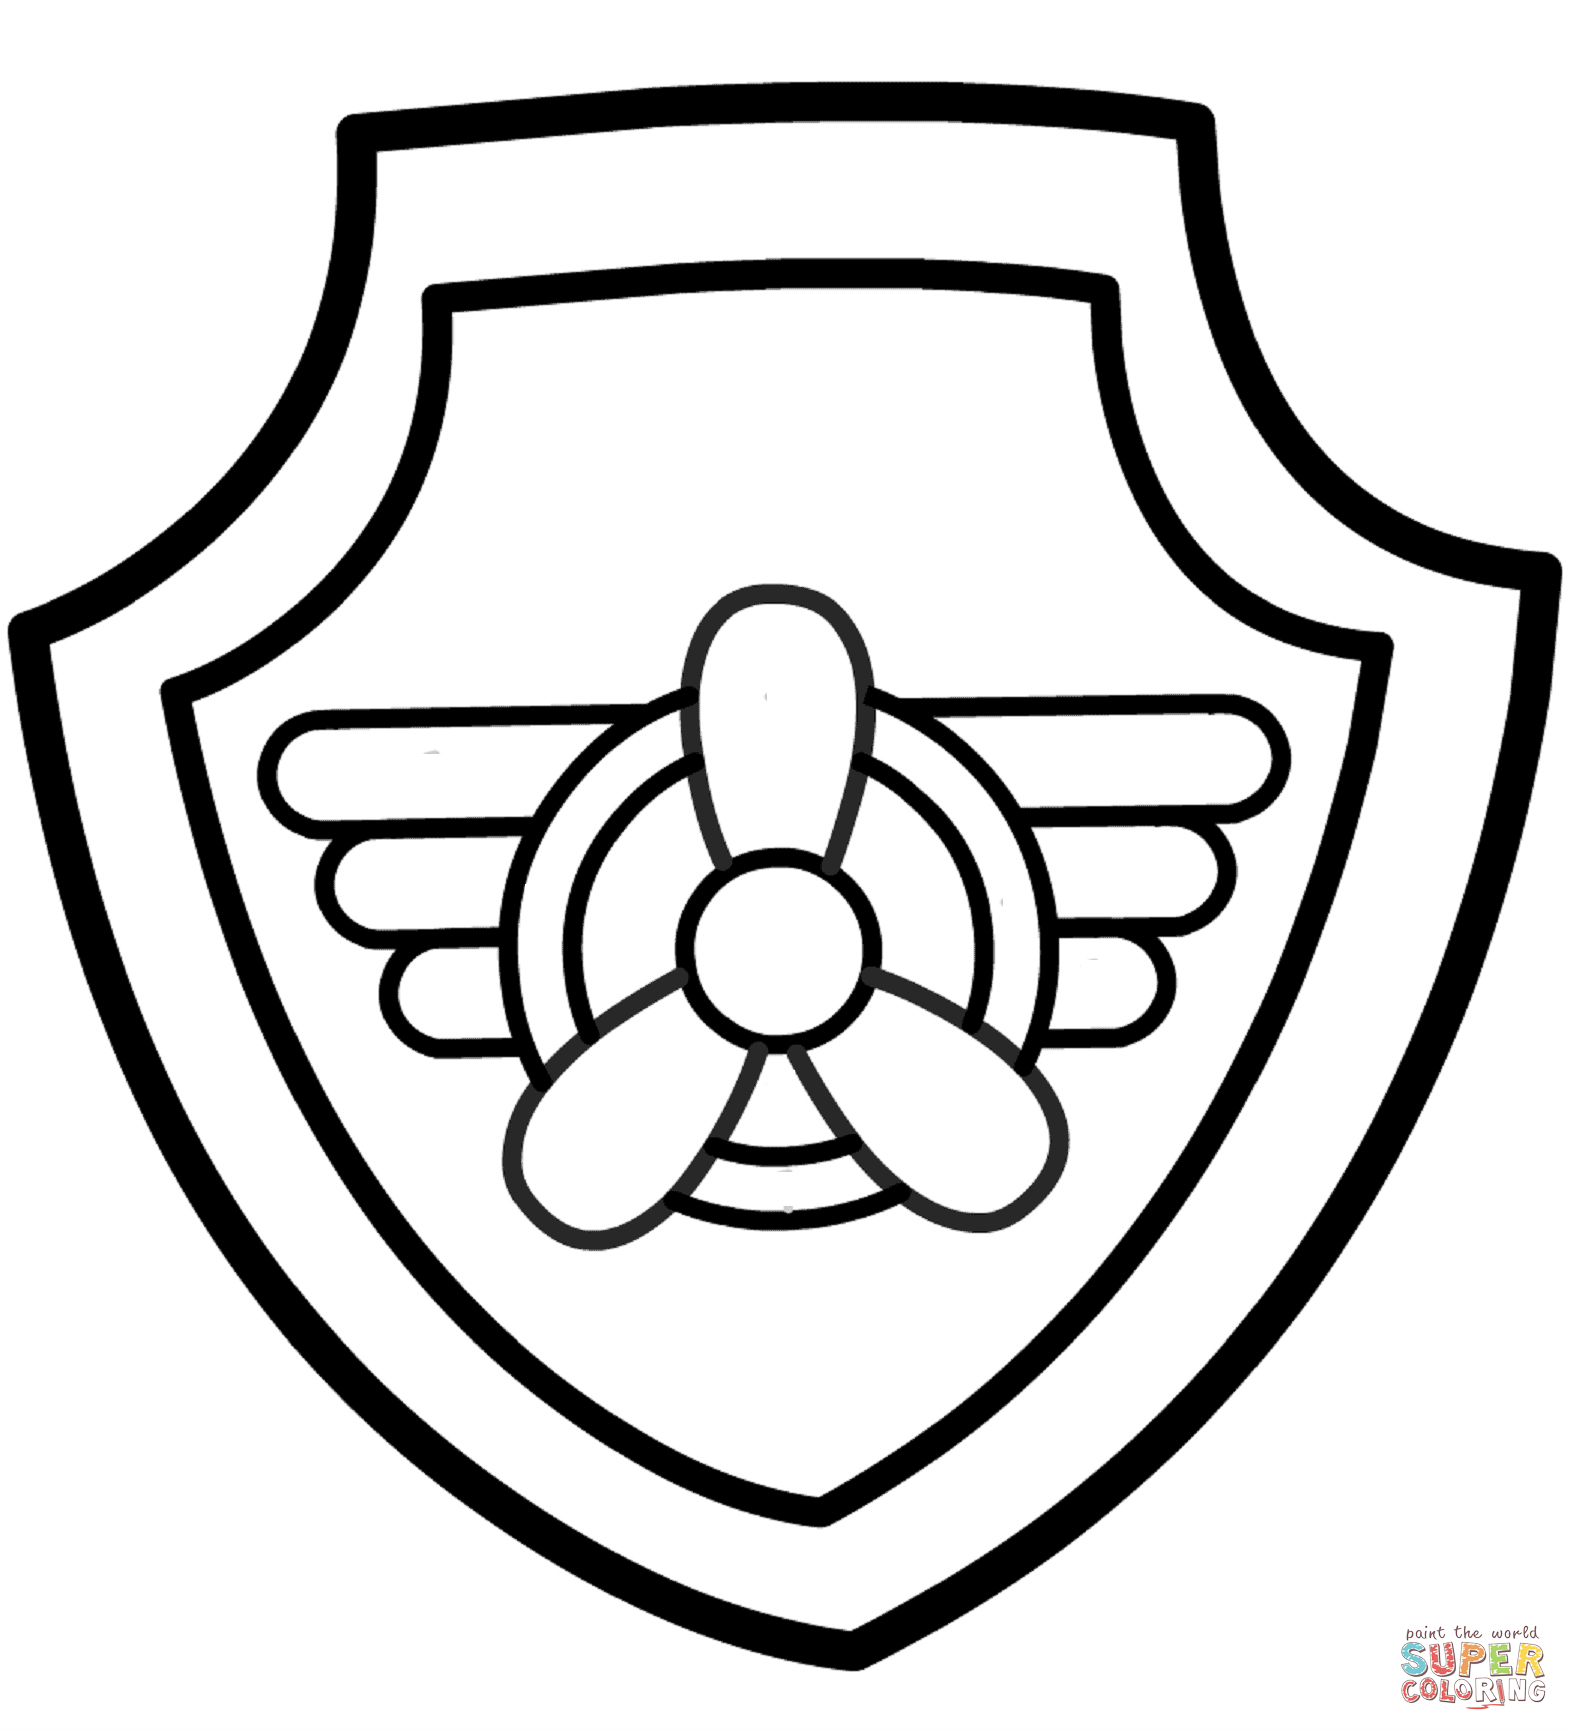 Paw patrol skyes badge coloring page free printable coloring pages